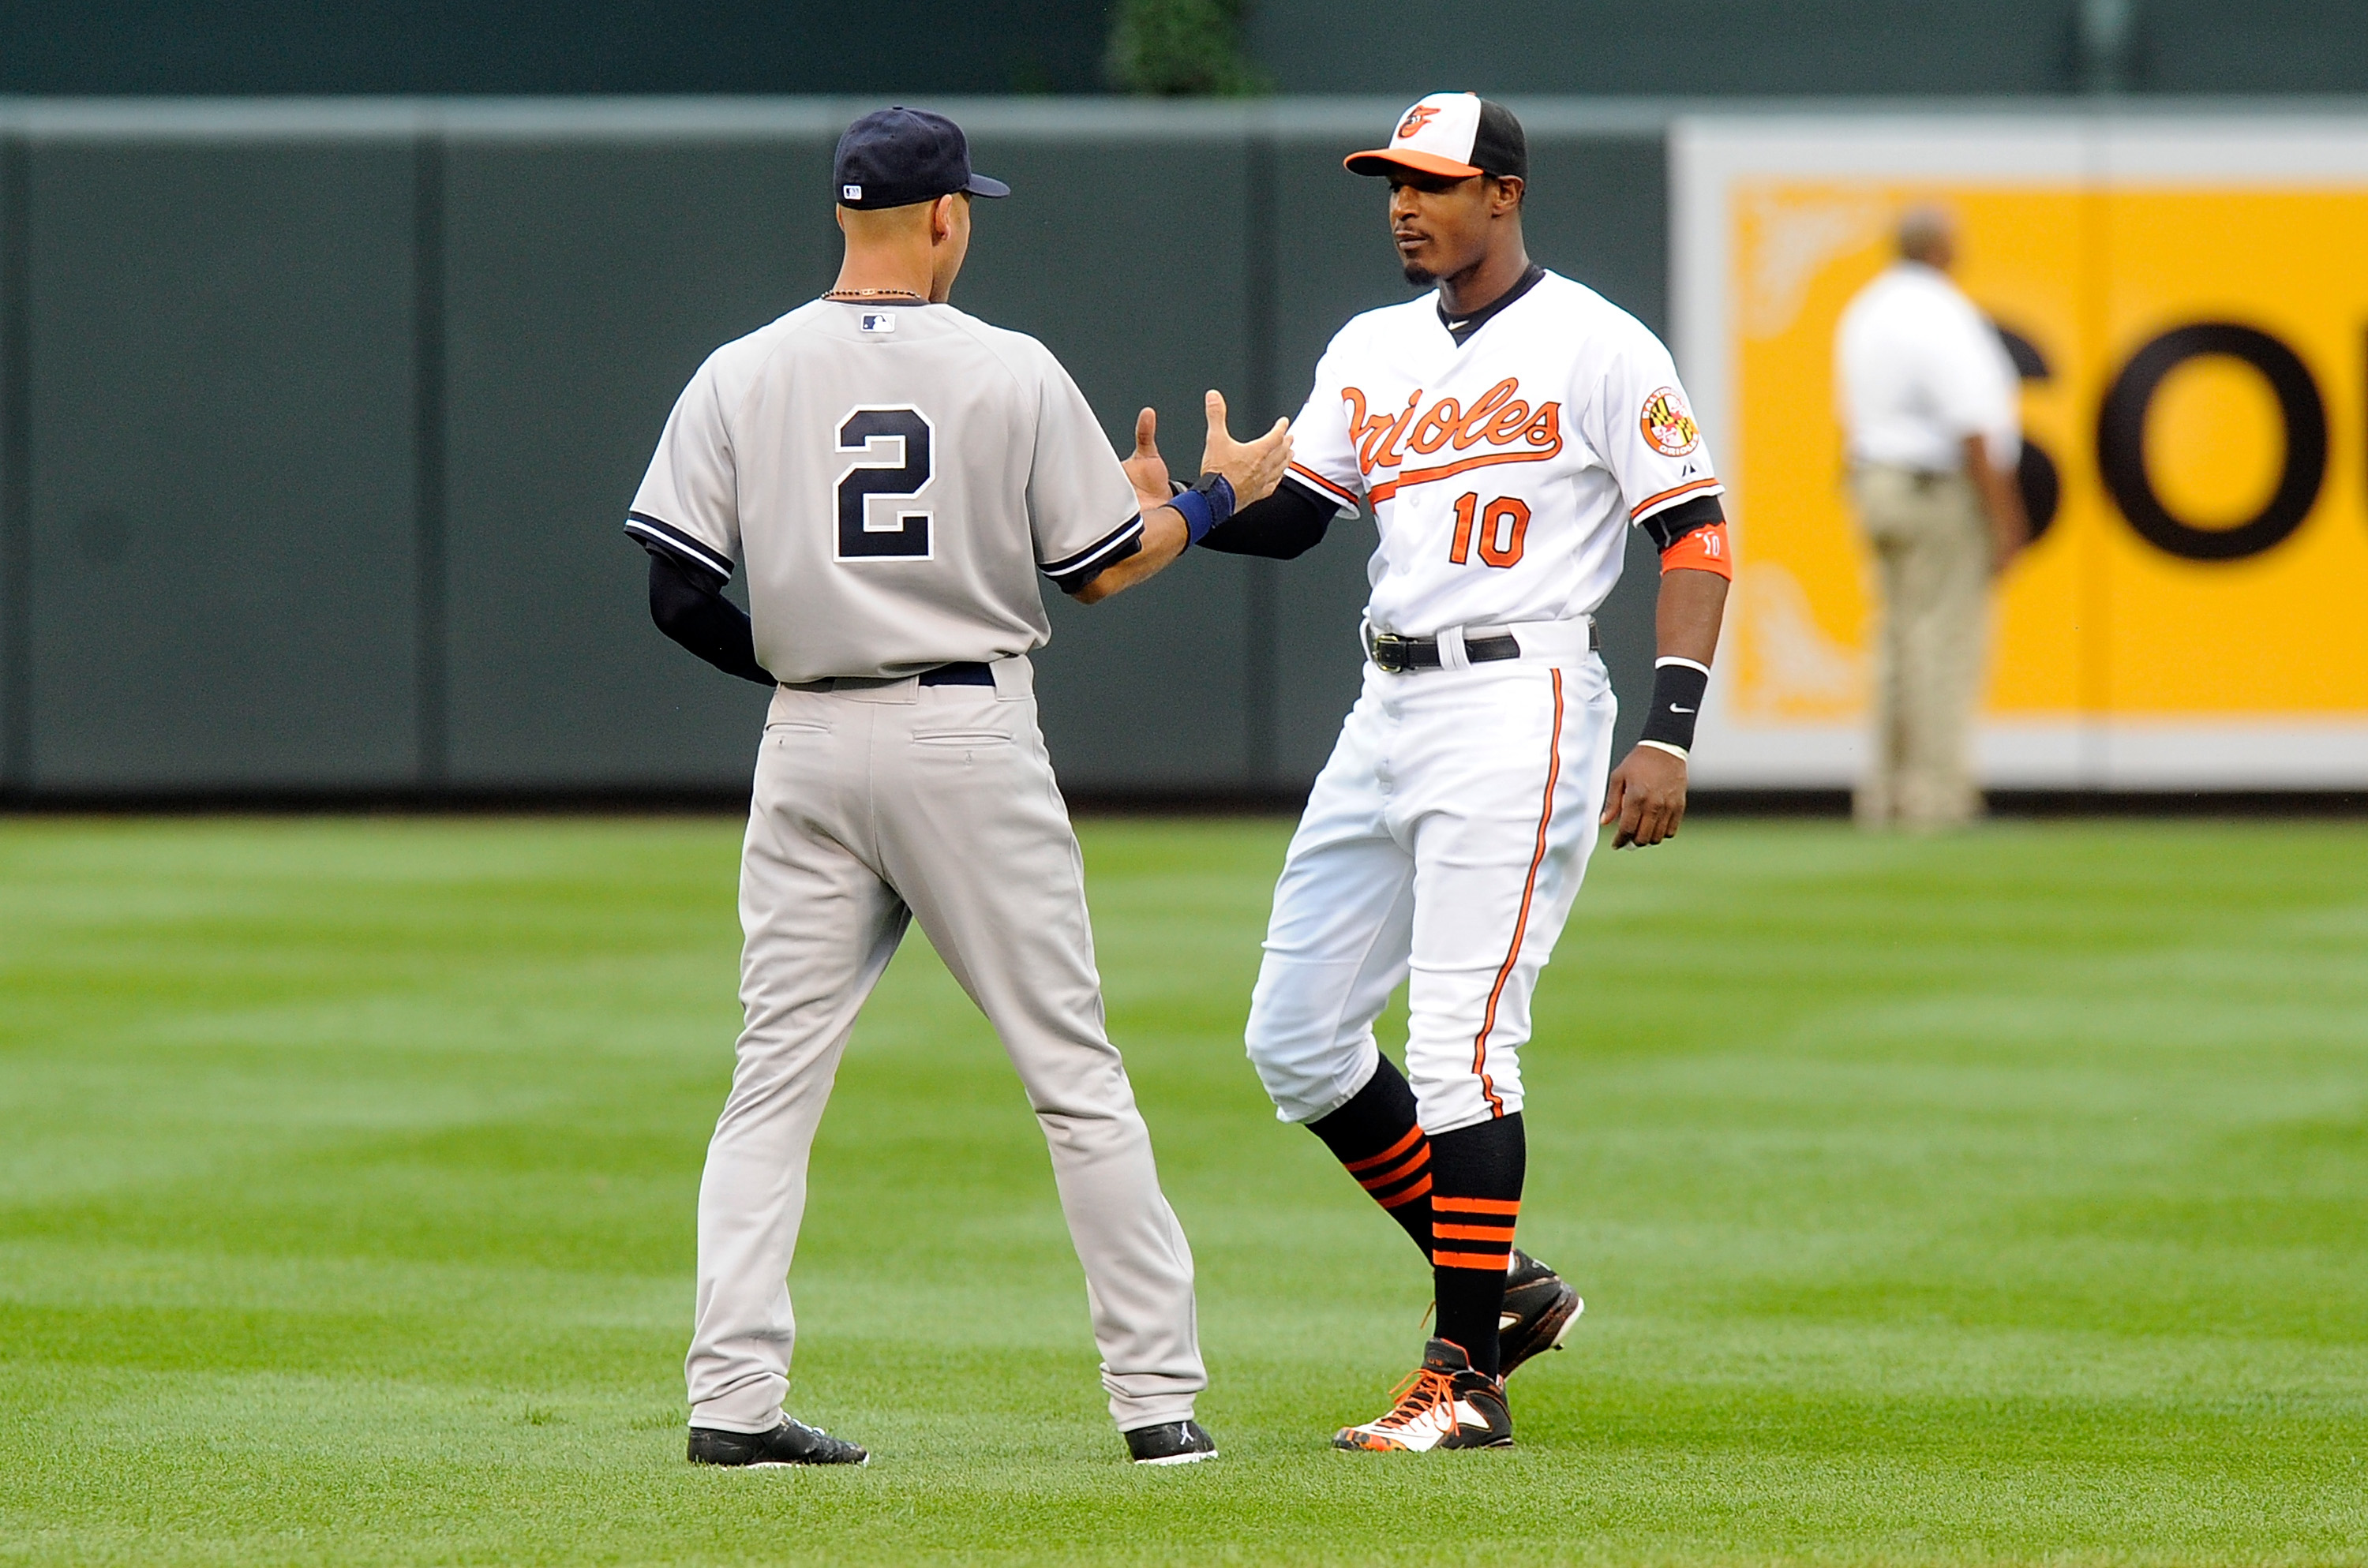 Derek Jeter greets Adam Jones in Baltimore on August 11, 2014.  (Photo by Greg Fiume/Getty Images)